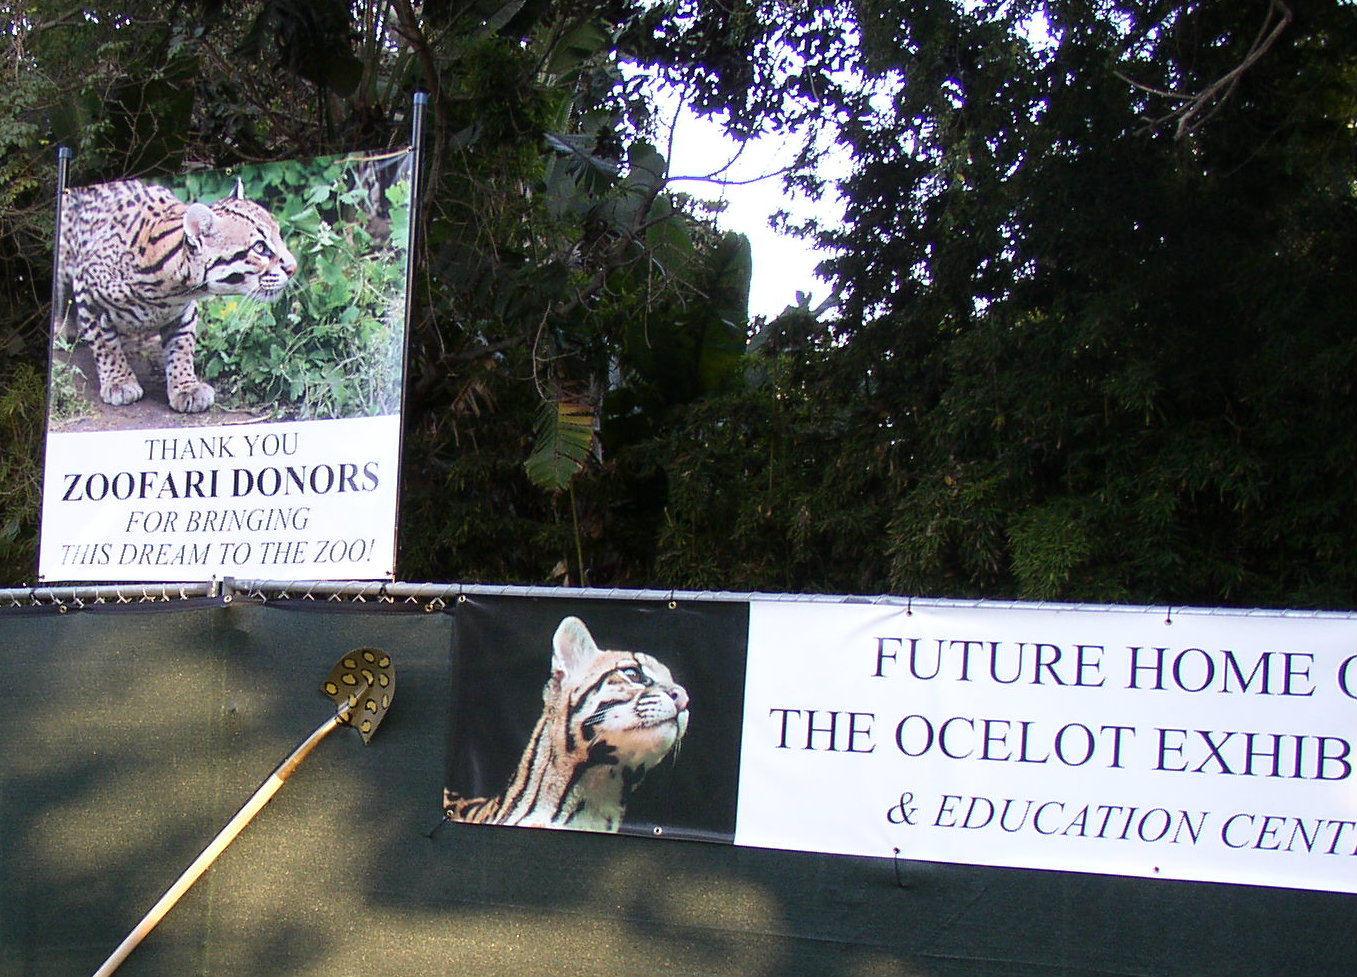 Future home for the Ocelot Exhibit. The Santa Ana Zoo has been chosen as one of the select zoos in North America to receive an Ocelot. Photo by Lynn O'Connell